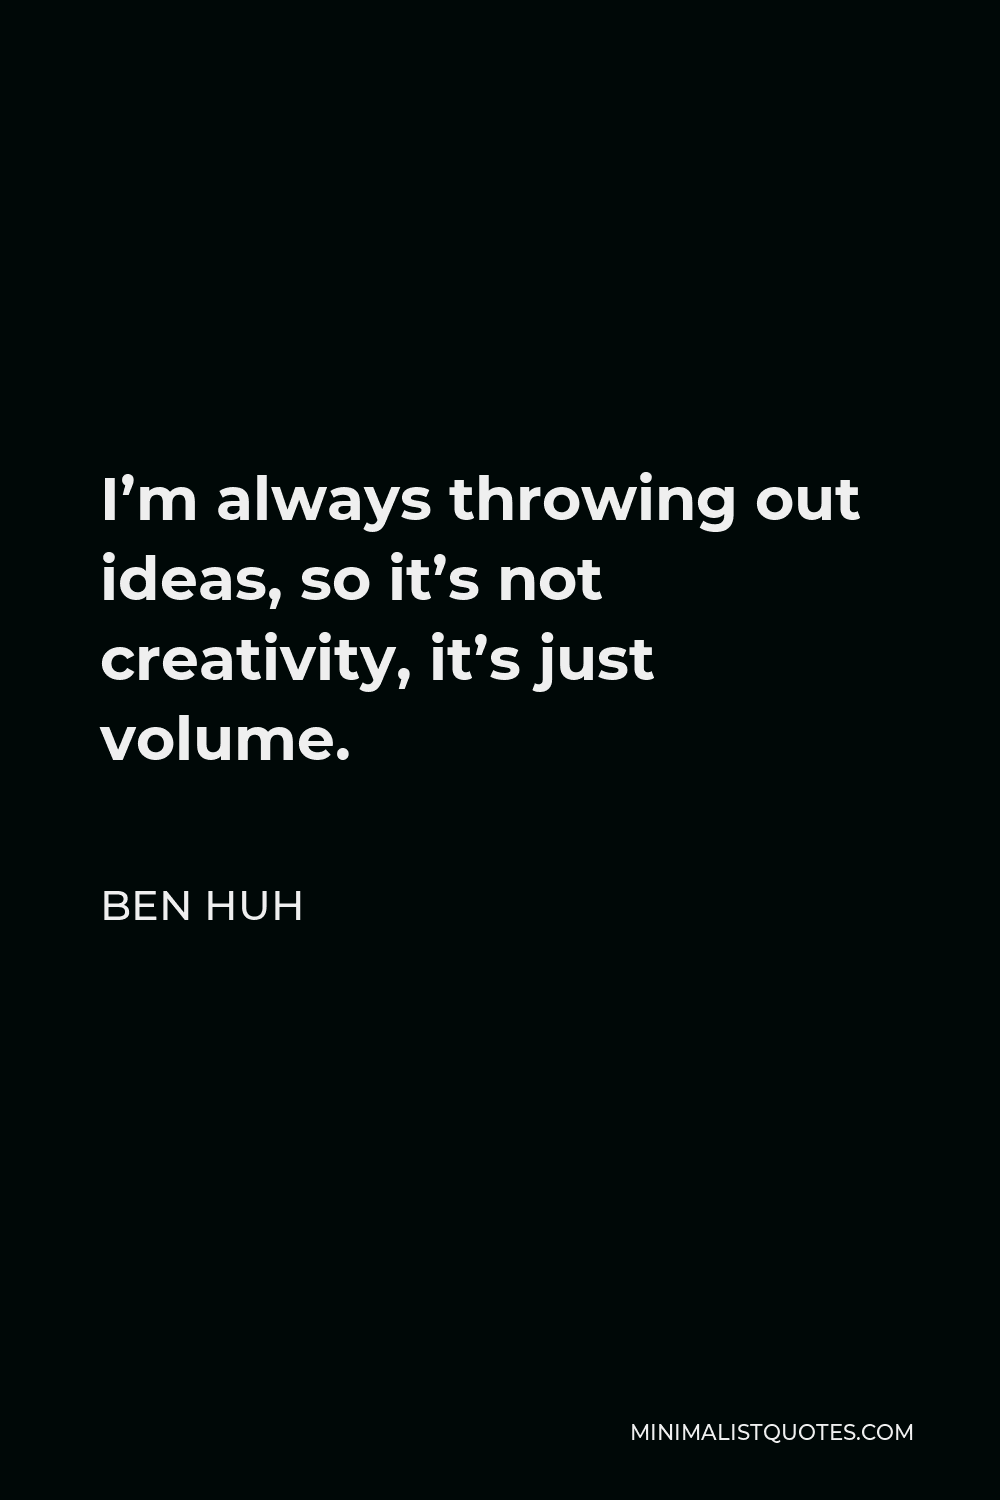 Ben Huh Quote - I’m always throwing out ideas, so it’s not creativity, it’s just volume.